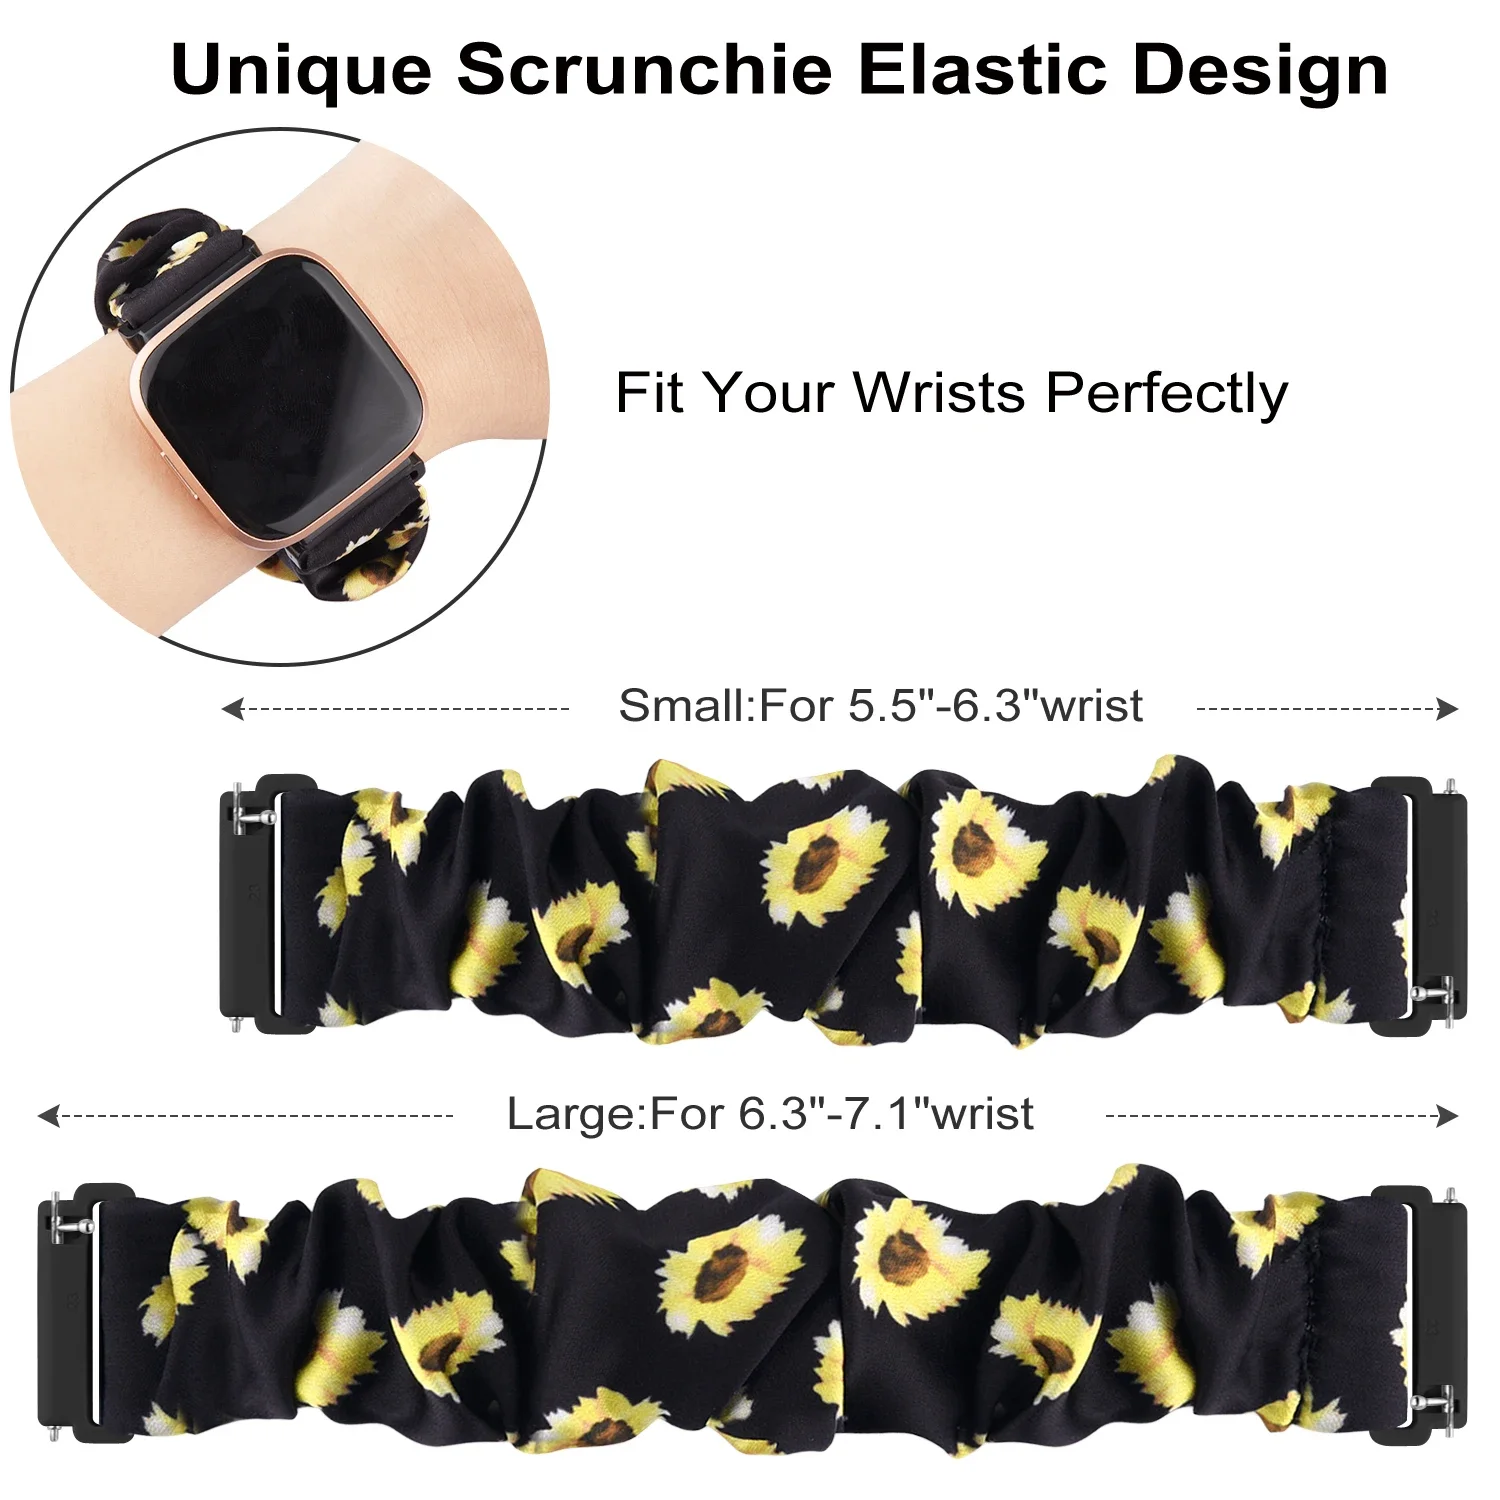 Scrunchies Elastic Strap for Fitbit Versa 2 Bracelet Woven Strap Replacement Fabric Wrist Band for Fitbit Versa Lite Watchband